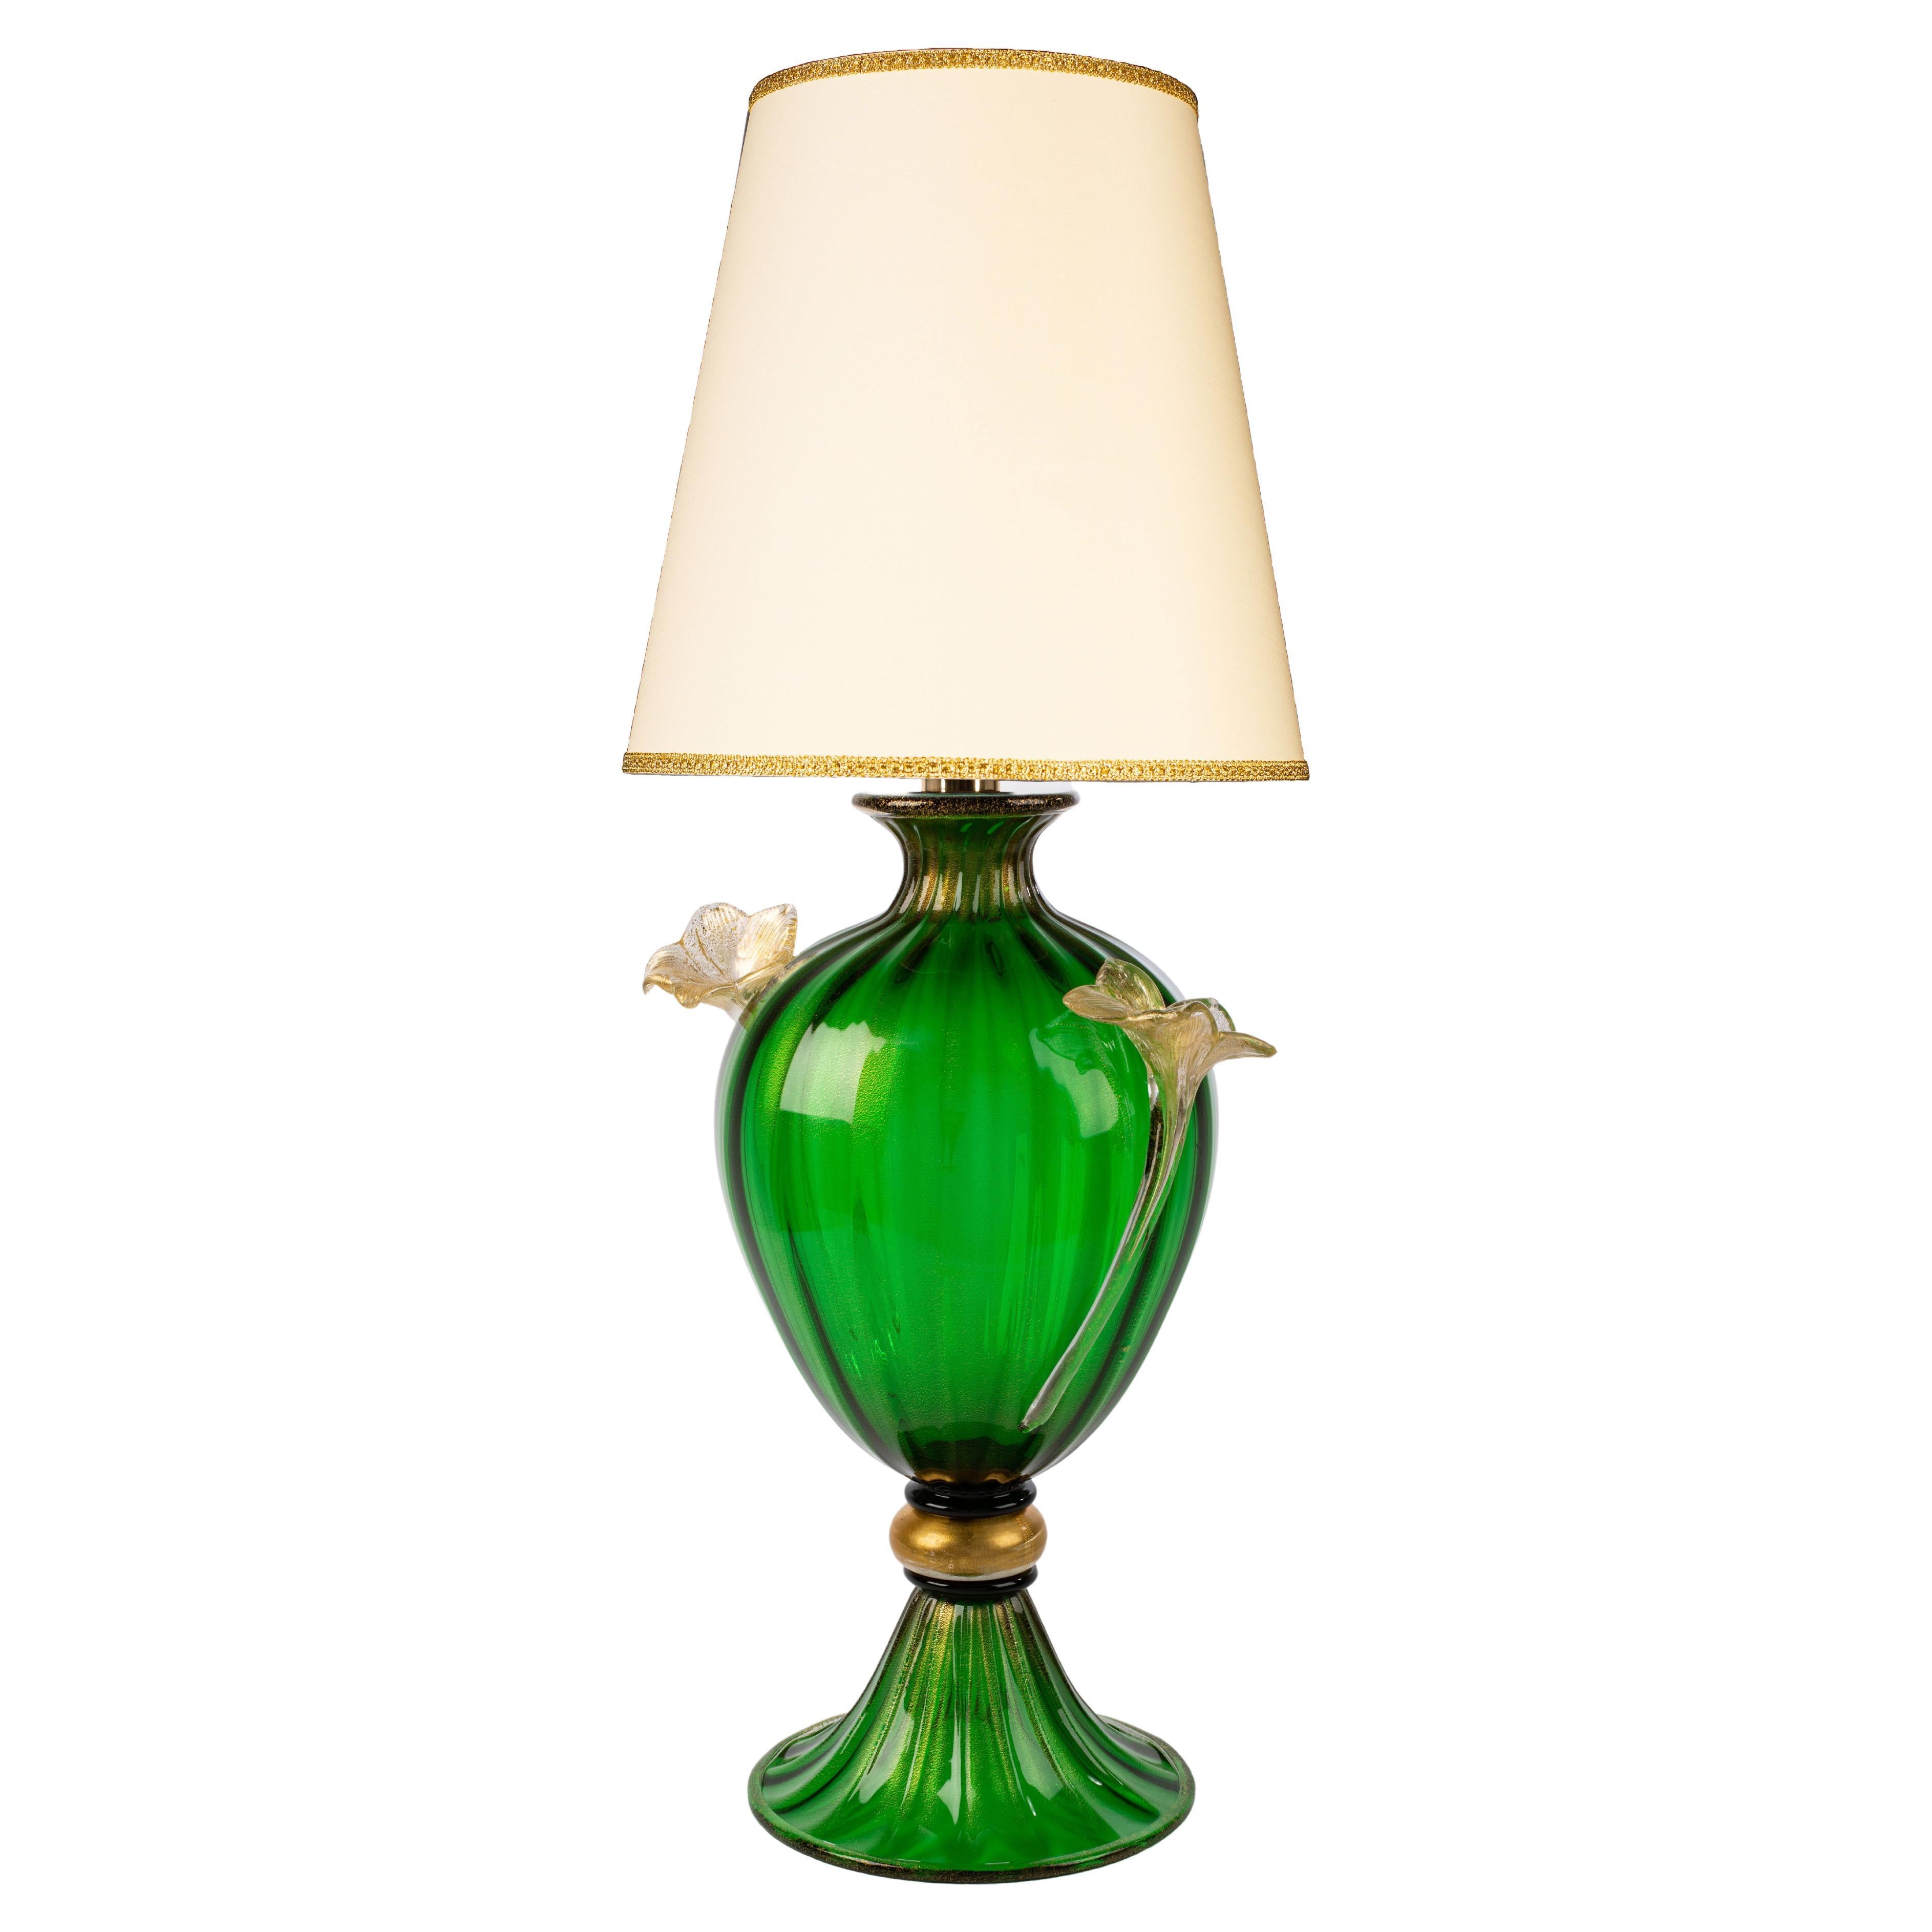 1295 Murano Hand Made Art Glass Table Lamp, Smeraldo Green 24k Gold Flowers H 31 For Sale